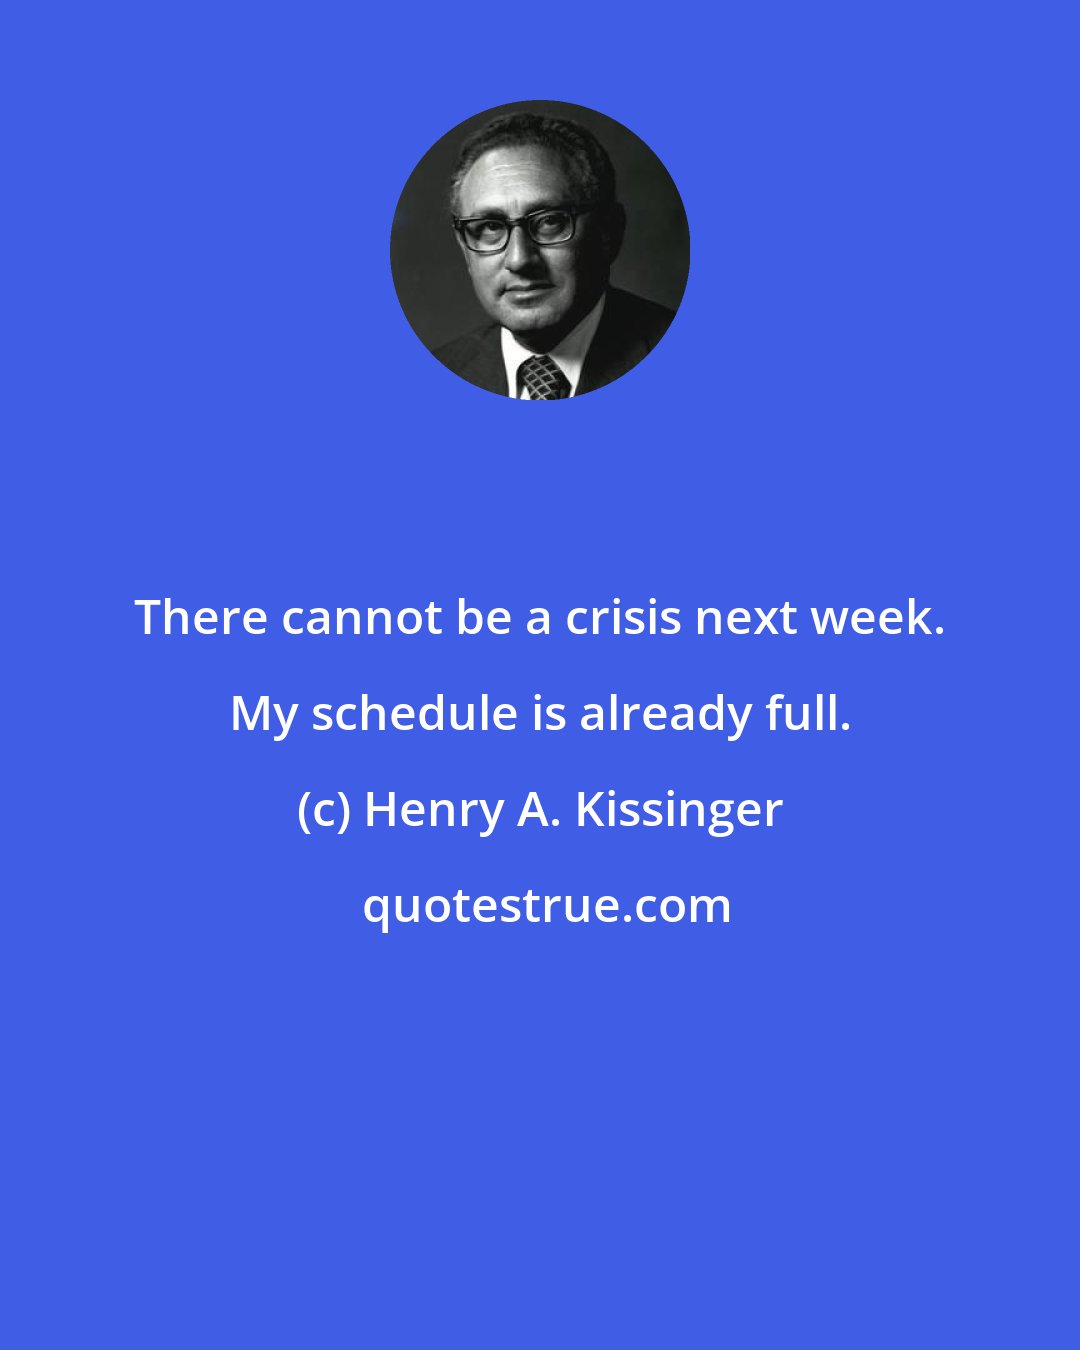 Henry A. Kissinger: There cannot be a crisis next week. My schedule is already full.